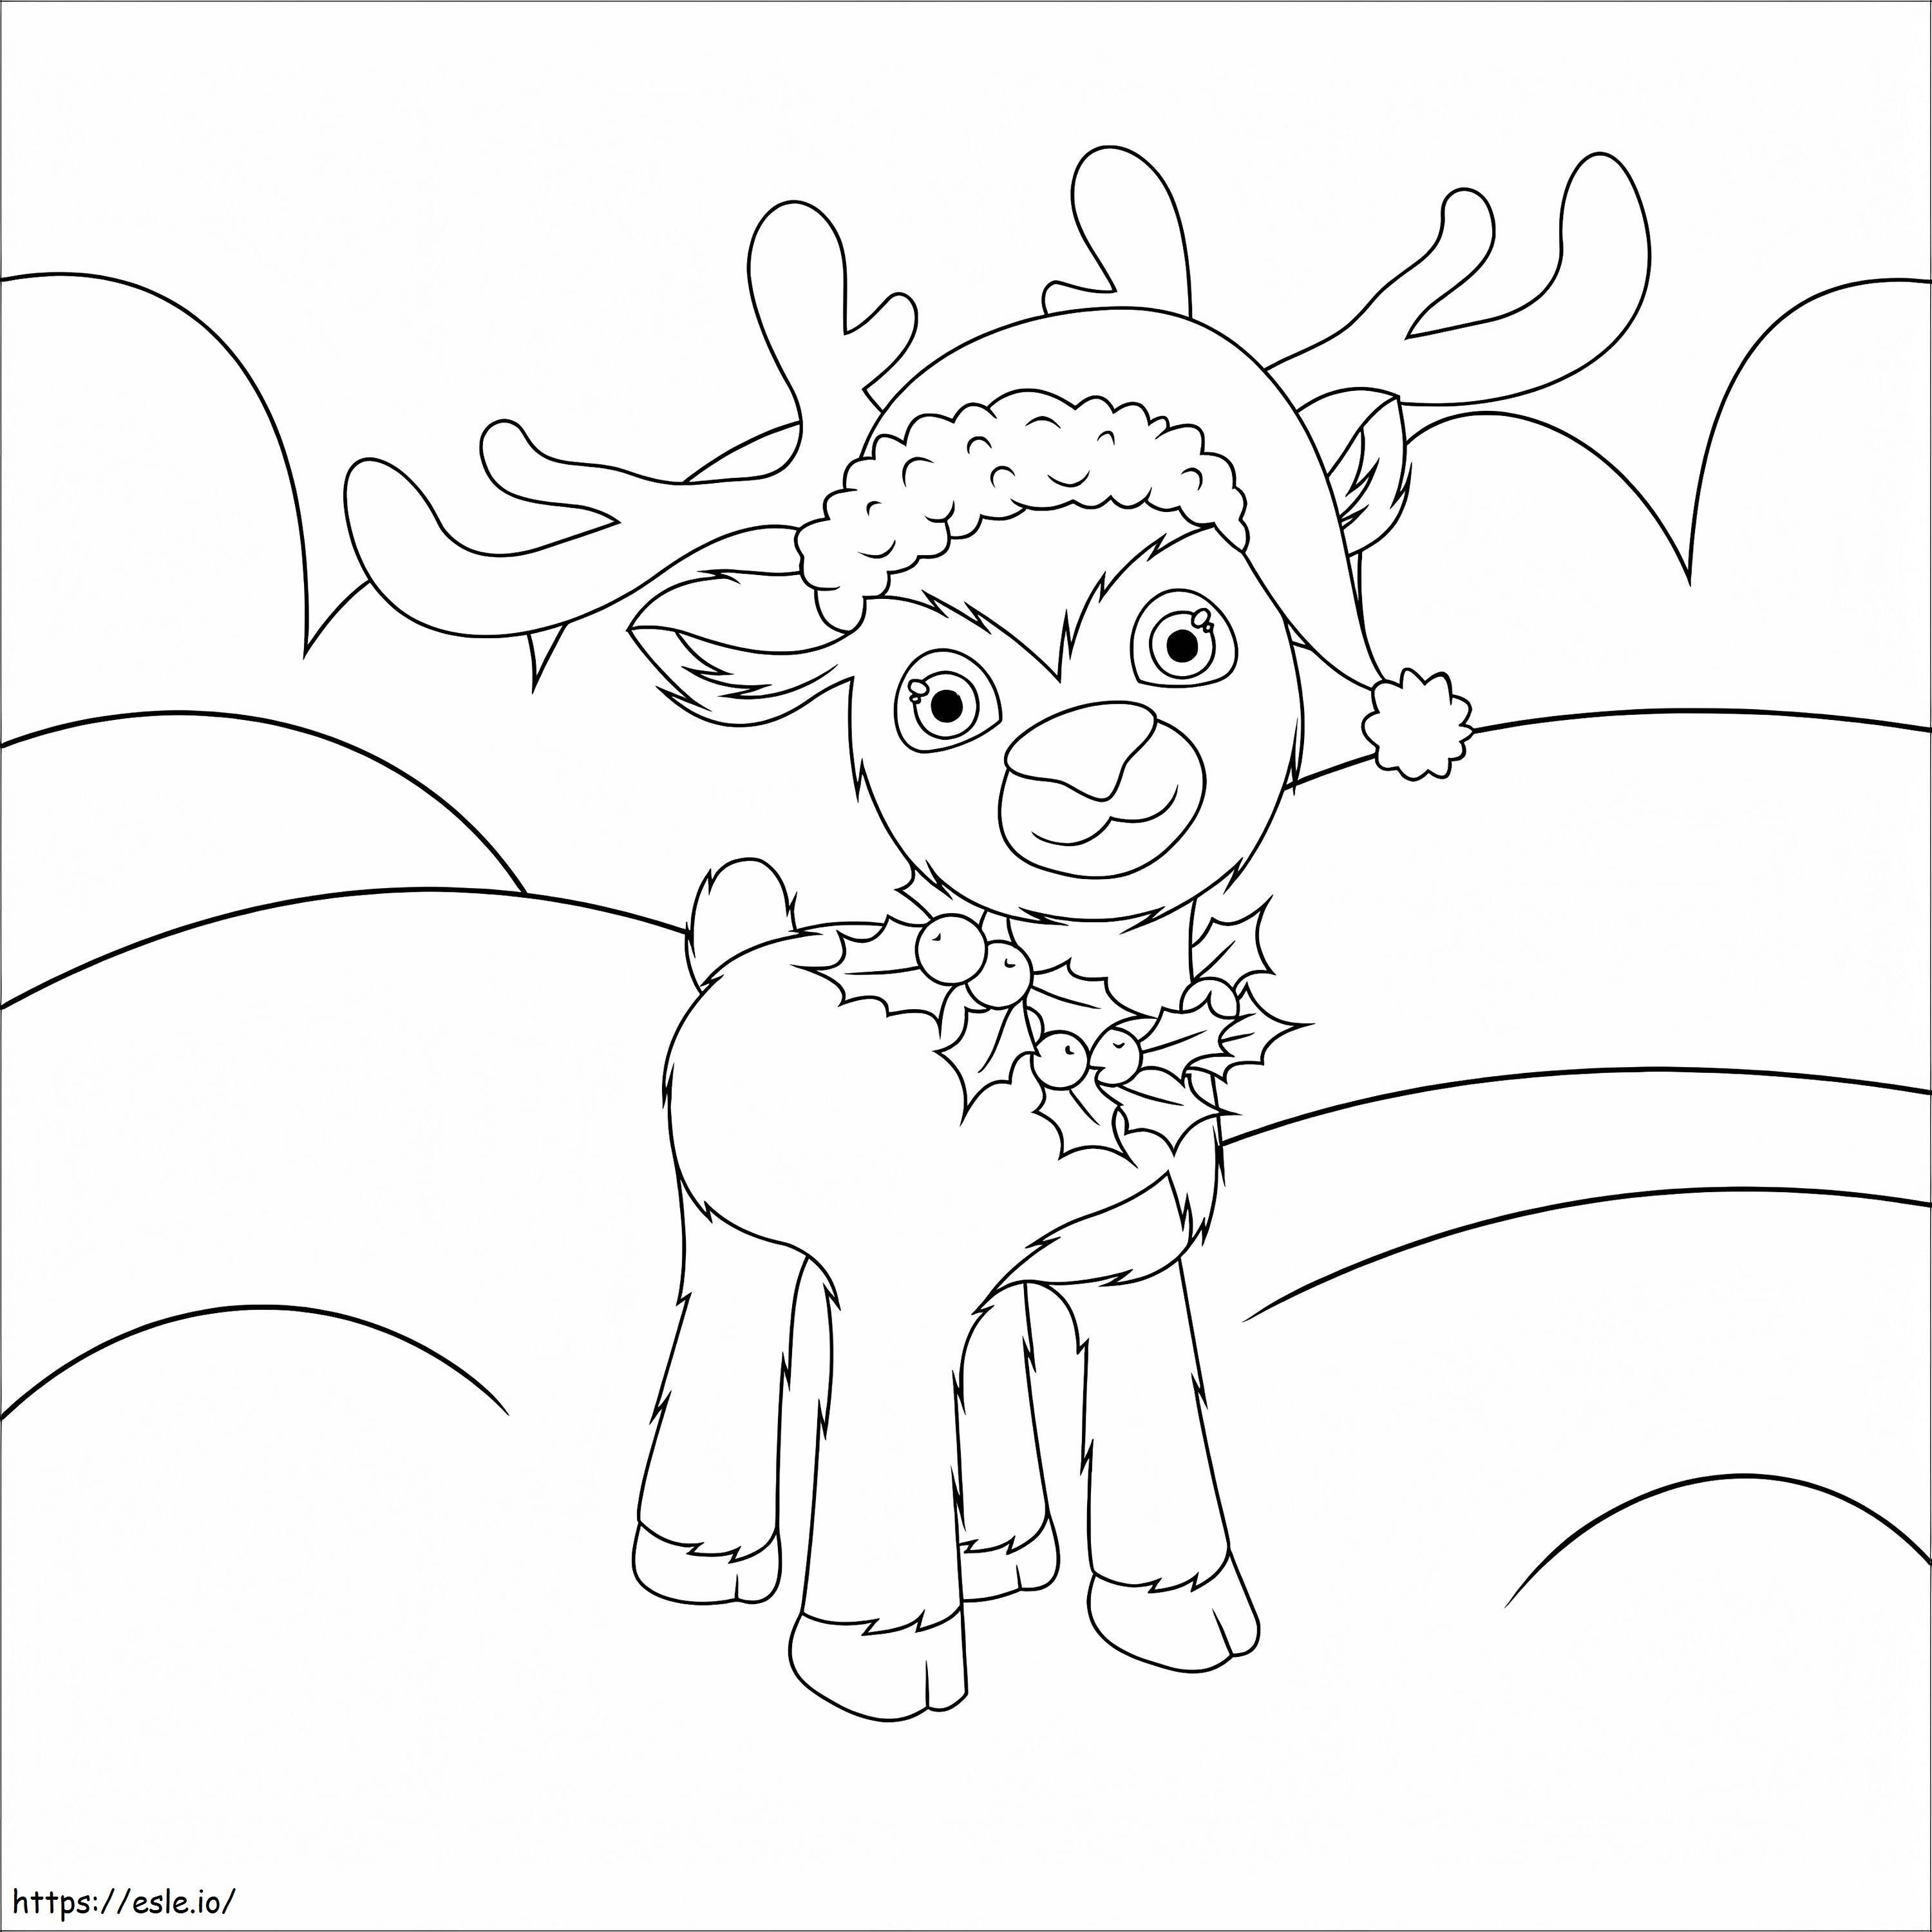 Lovely Christmas Reindeer coloring page